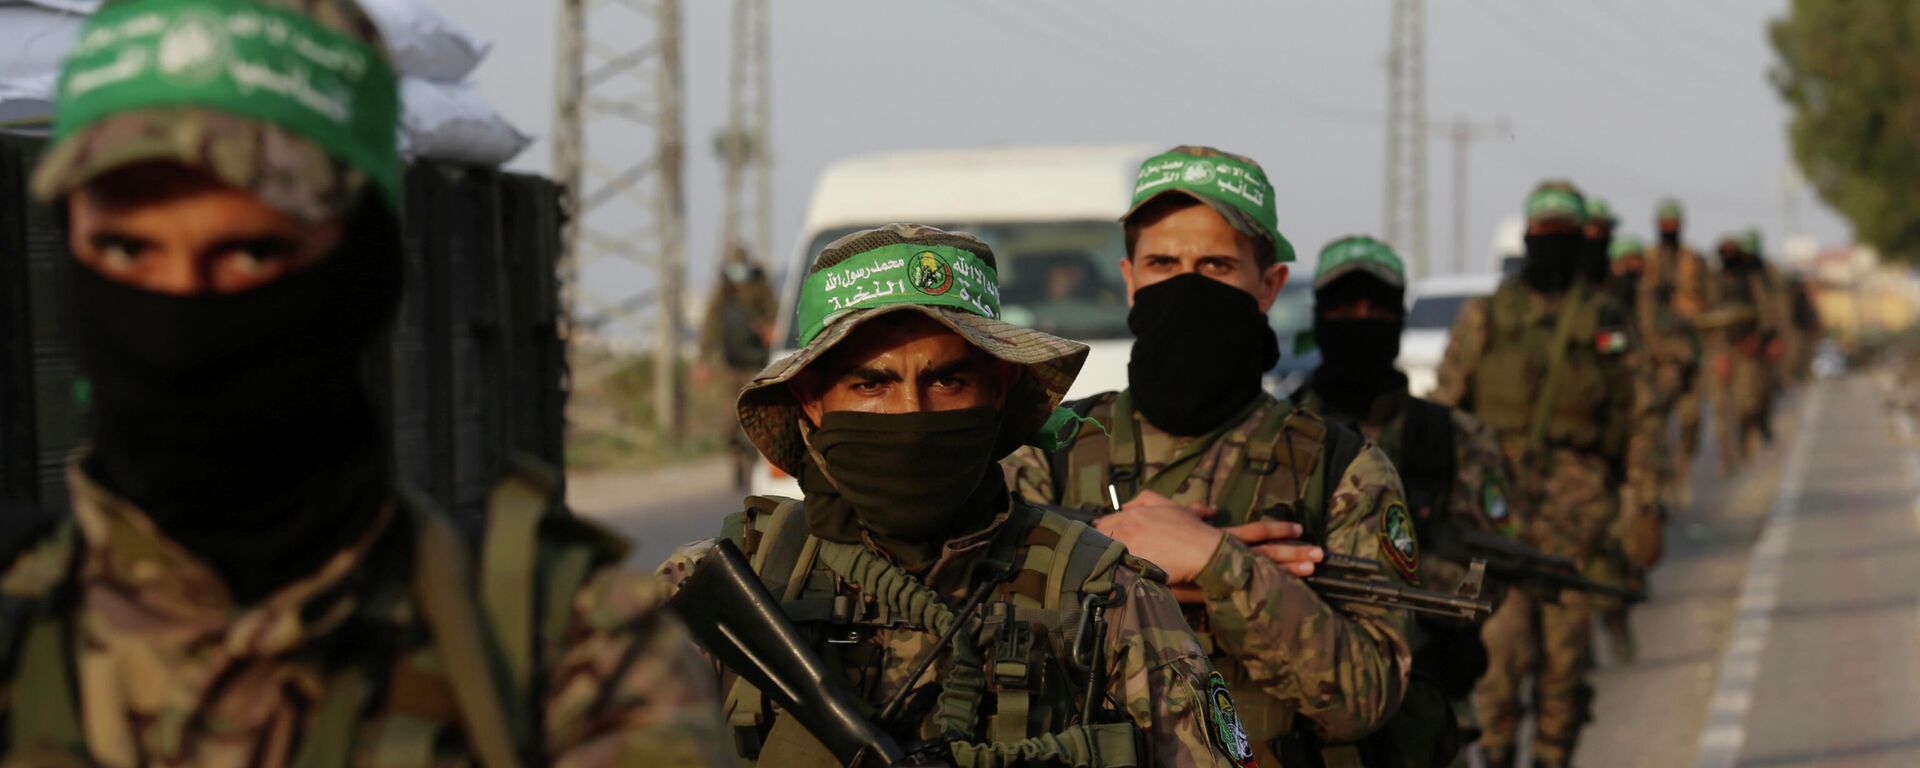 Masked militants from the Izzedine al-Qassam Brigades, a military wing of Hamas, march with their rifles along the main road of the Nusseirat refugee camp, central Gaza Strip, Thursday, 28 October 2021. - Sputnik International, 1920, 25.07.2022